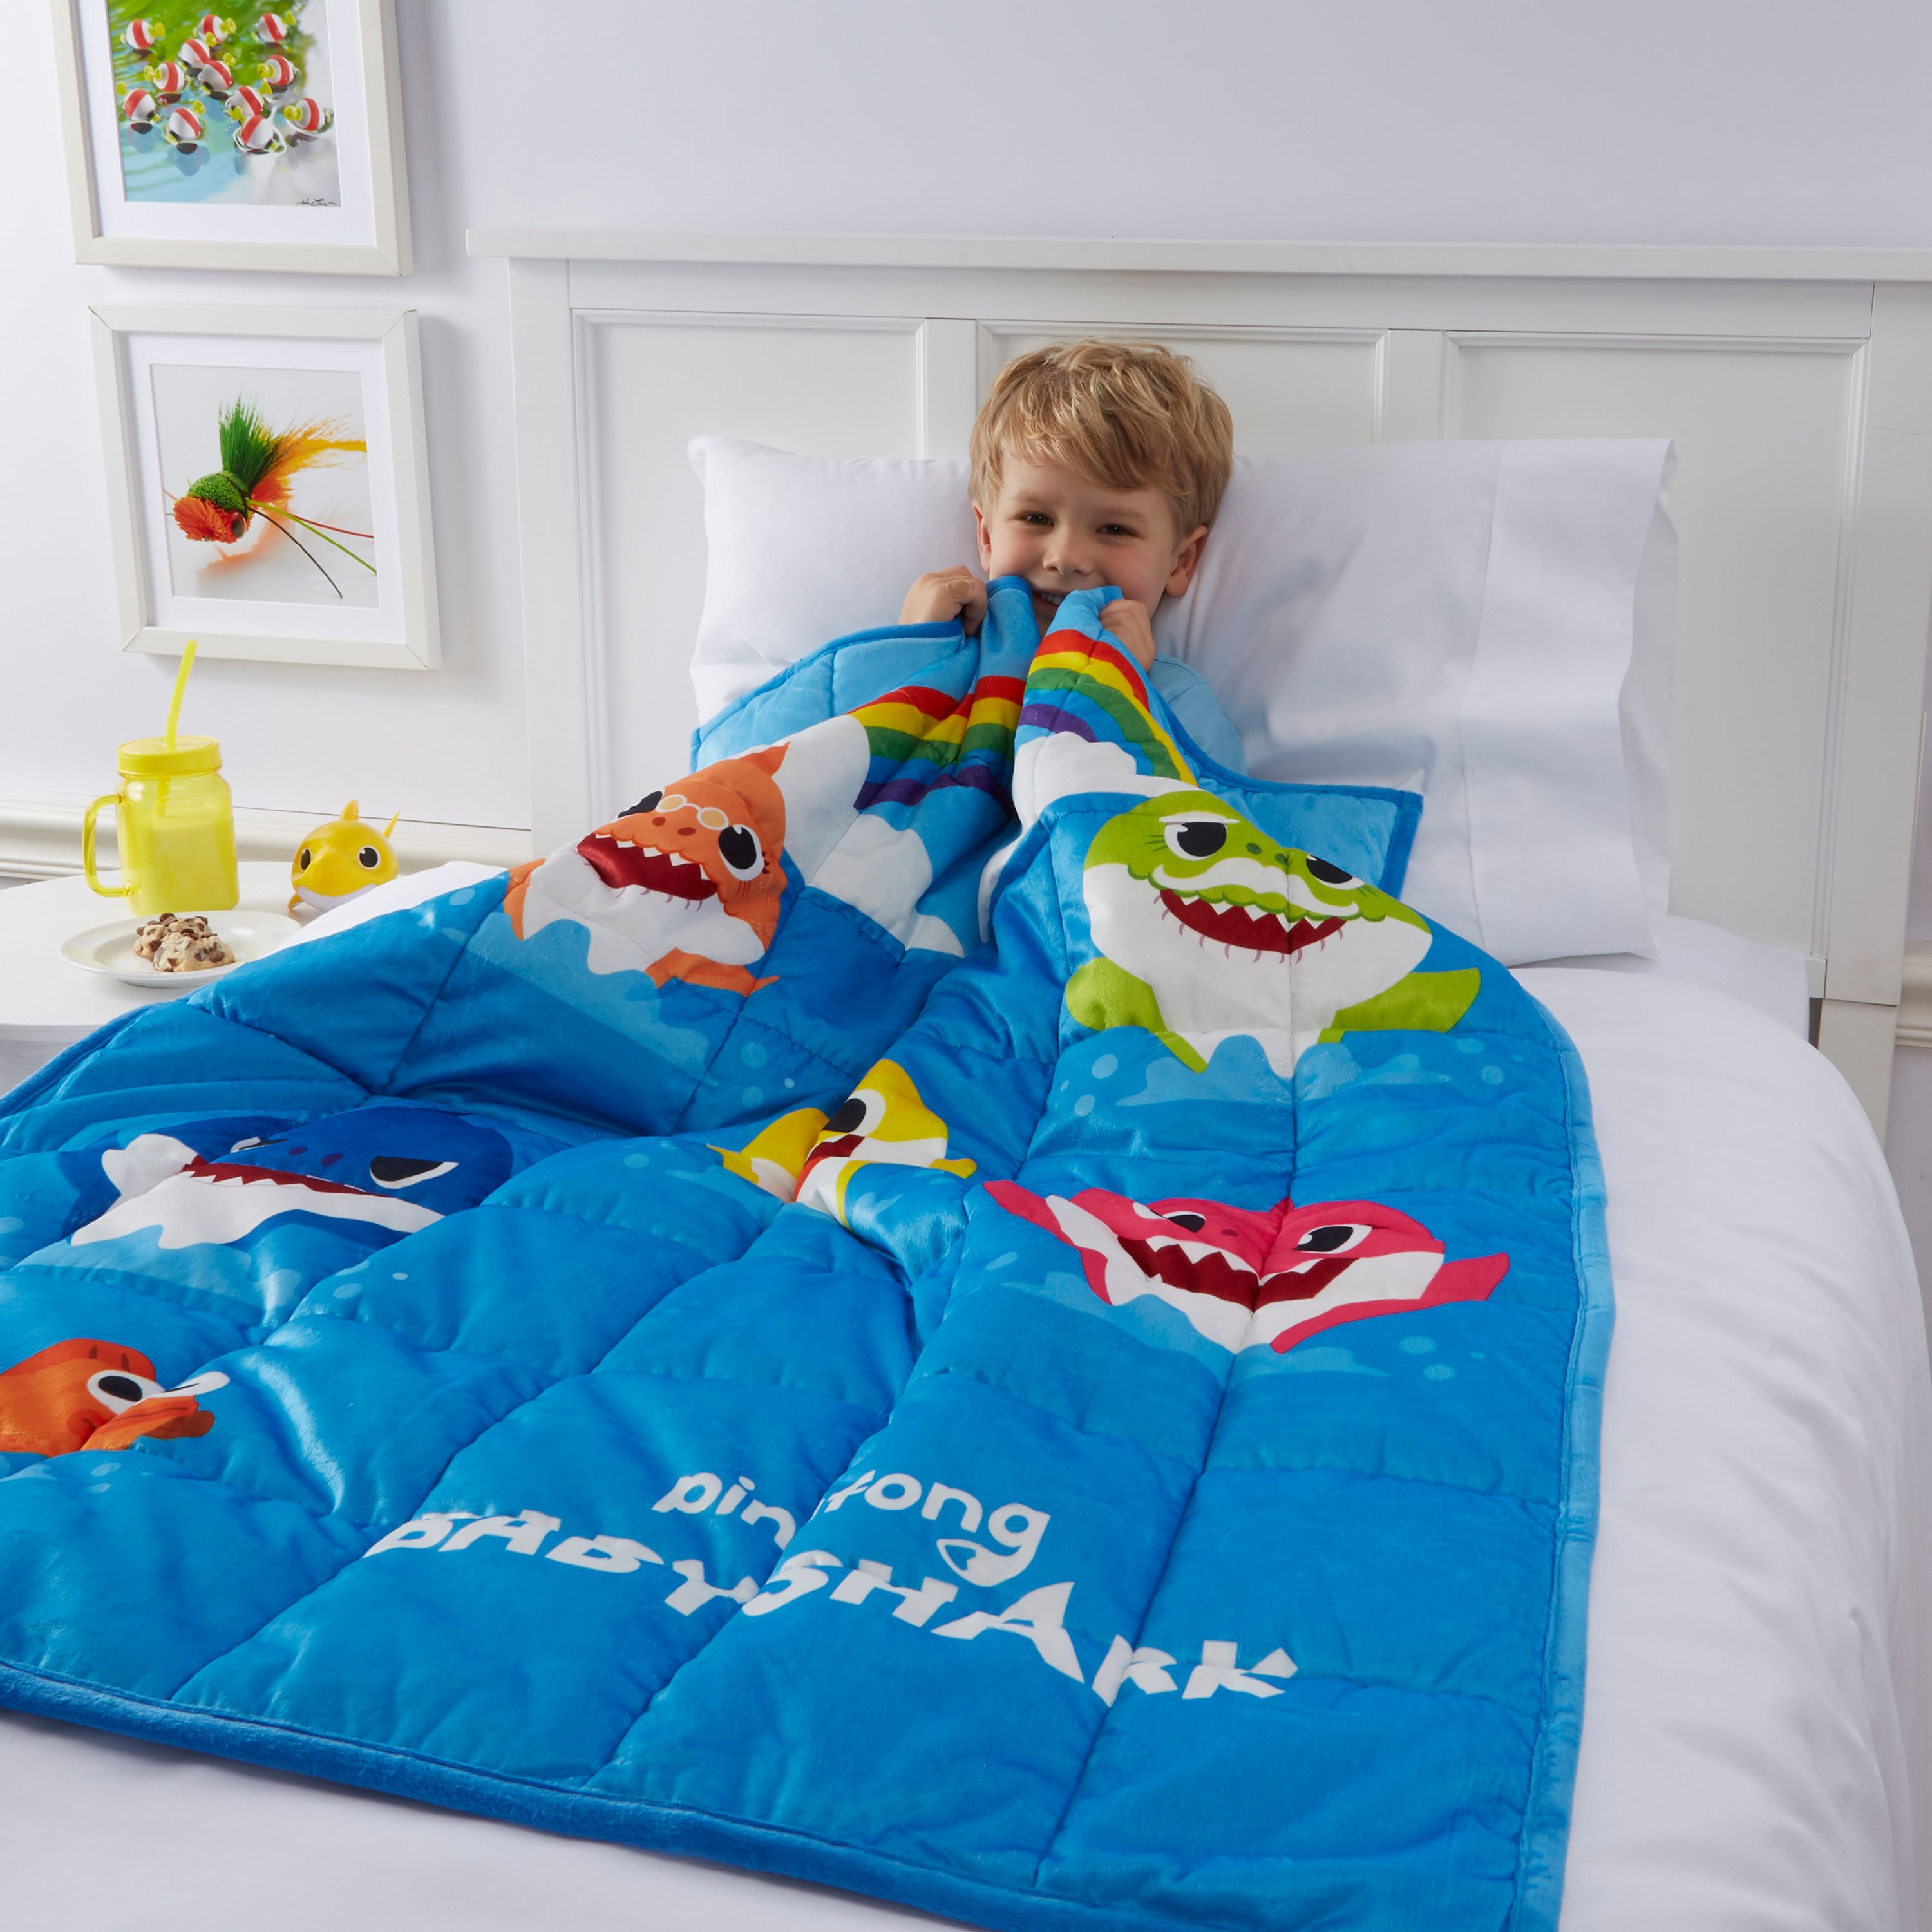 Baby Shark Kids Weighted Blanket, 4.5lb, 36 x 48, Blue, Nickelodeon - image 4 of 7